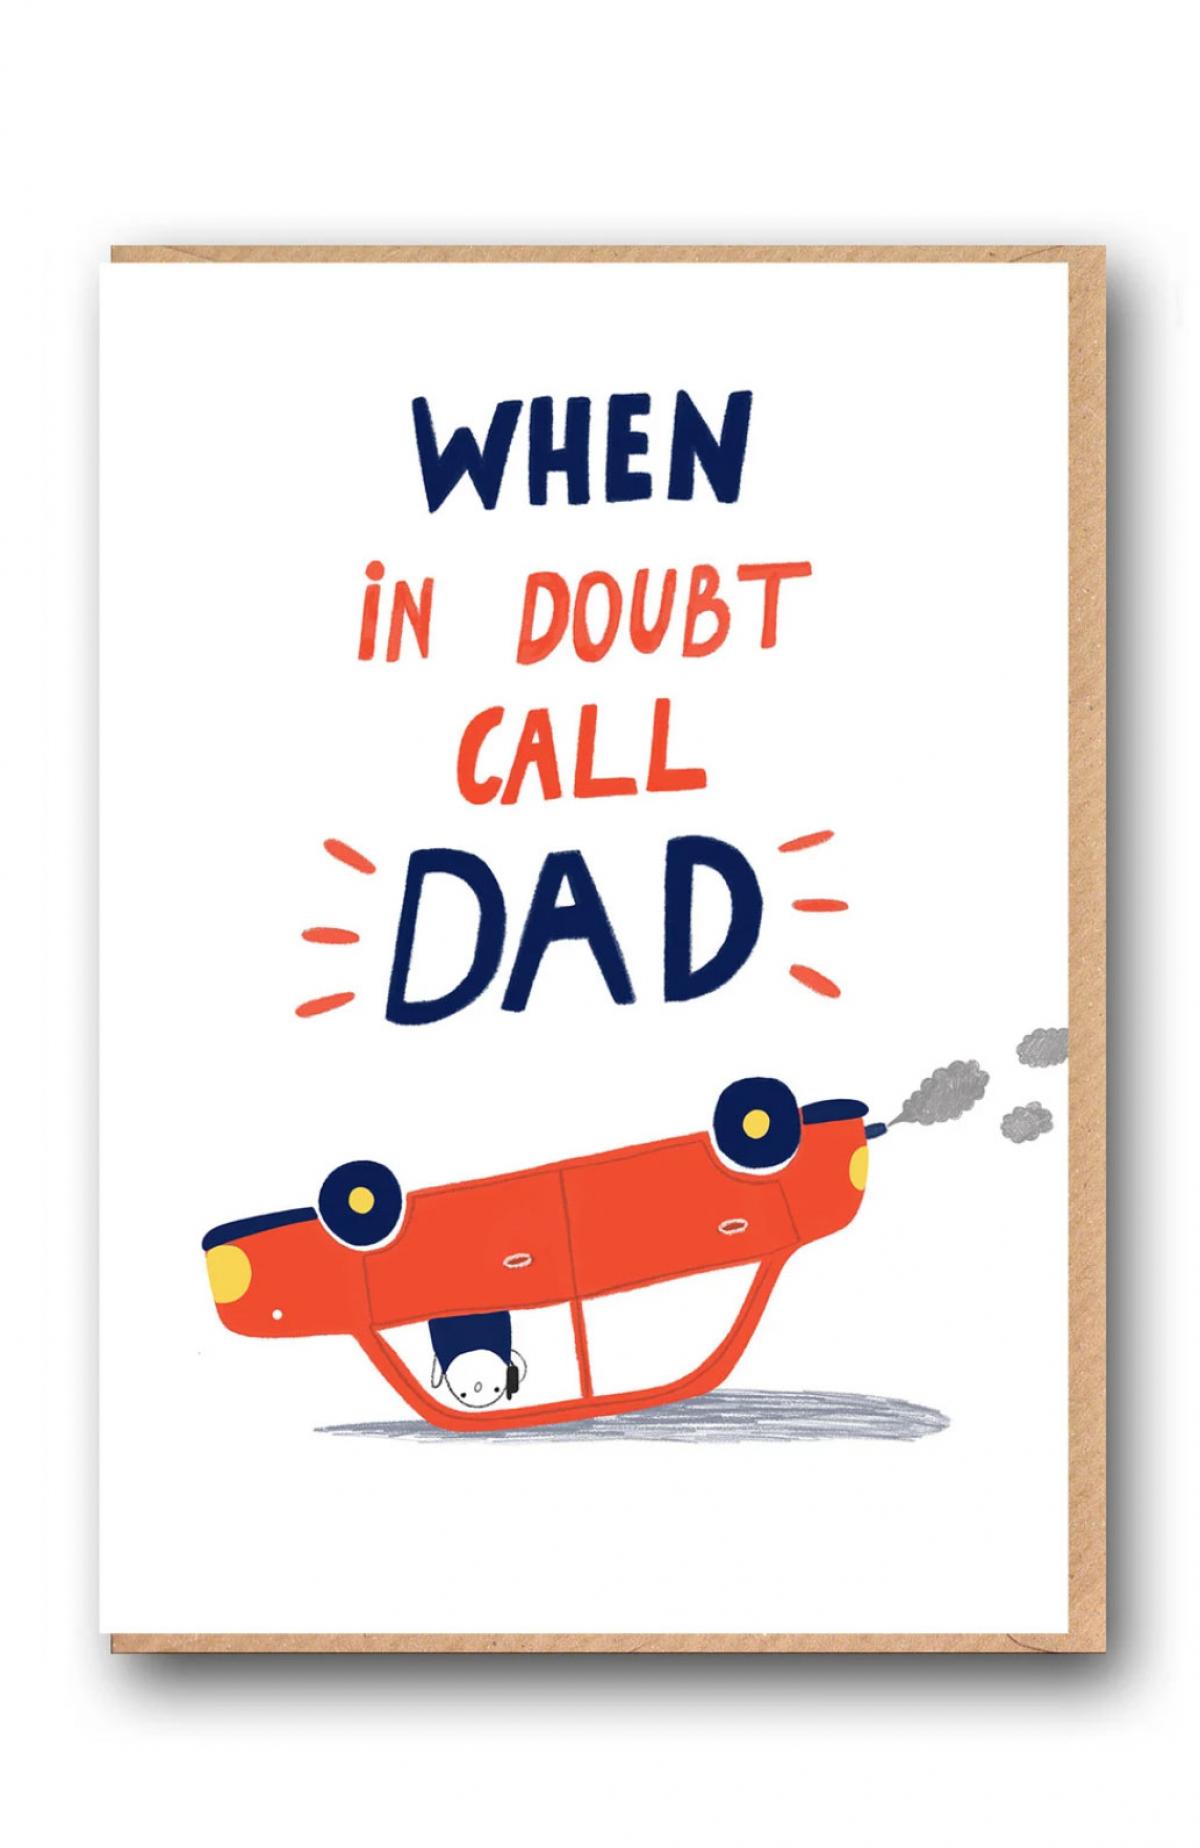 When in doubt call dad